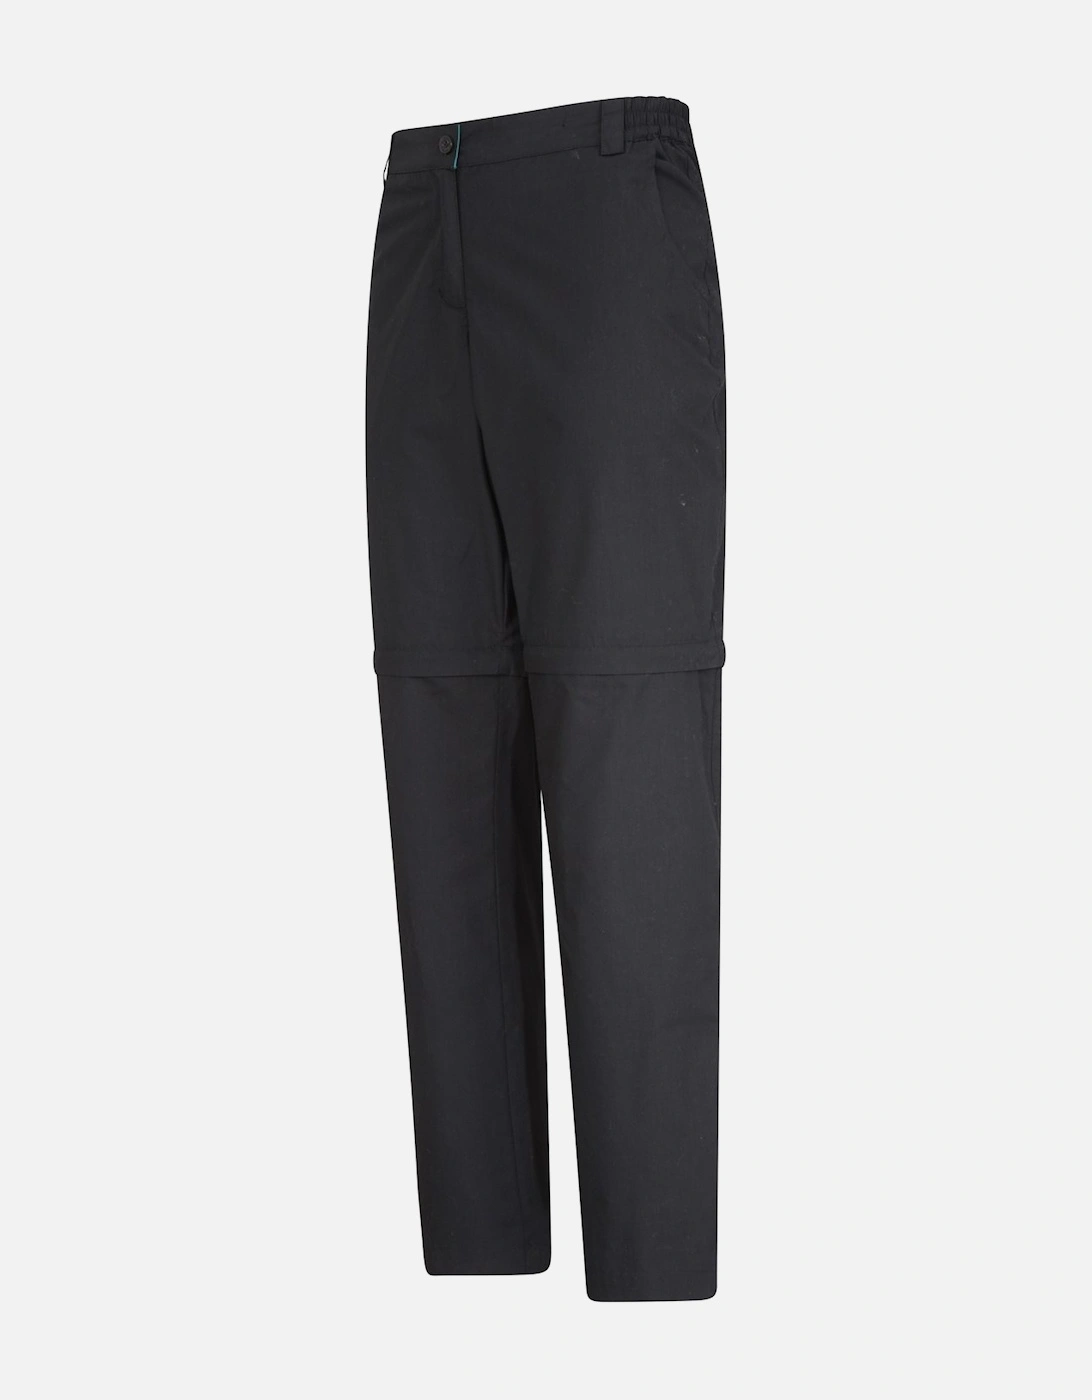 Womens/Ladies Quest Zip-Off Hiking Trousers